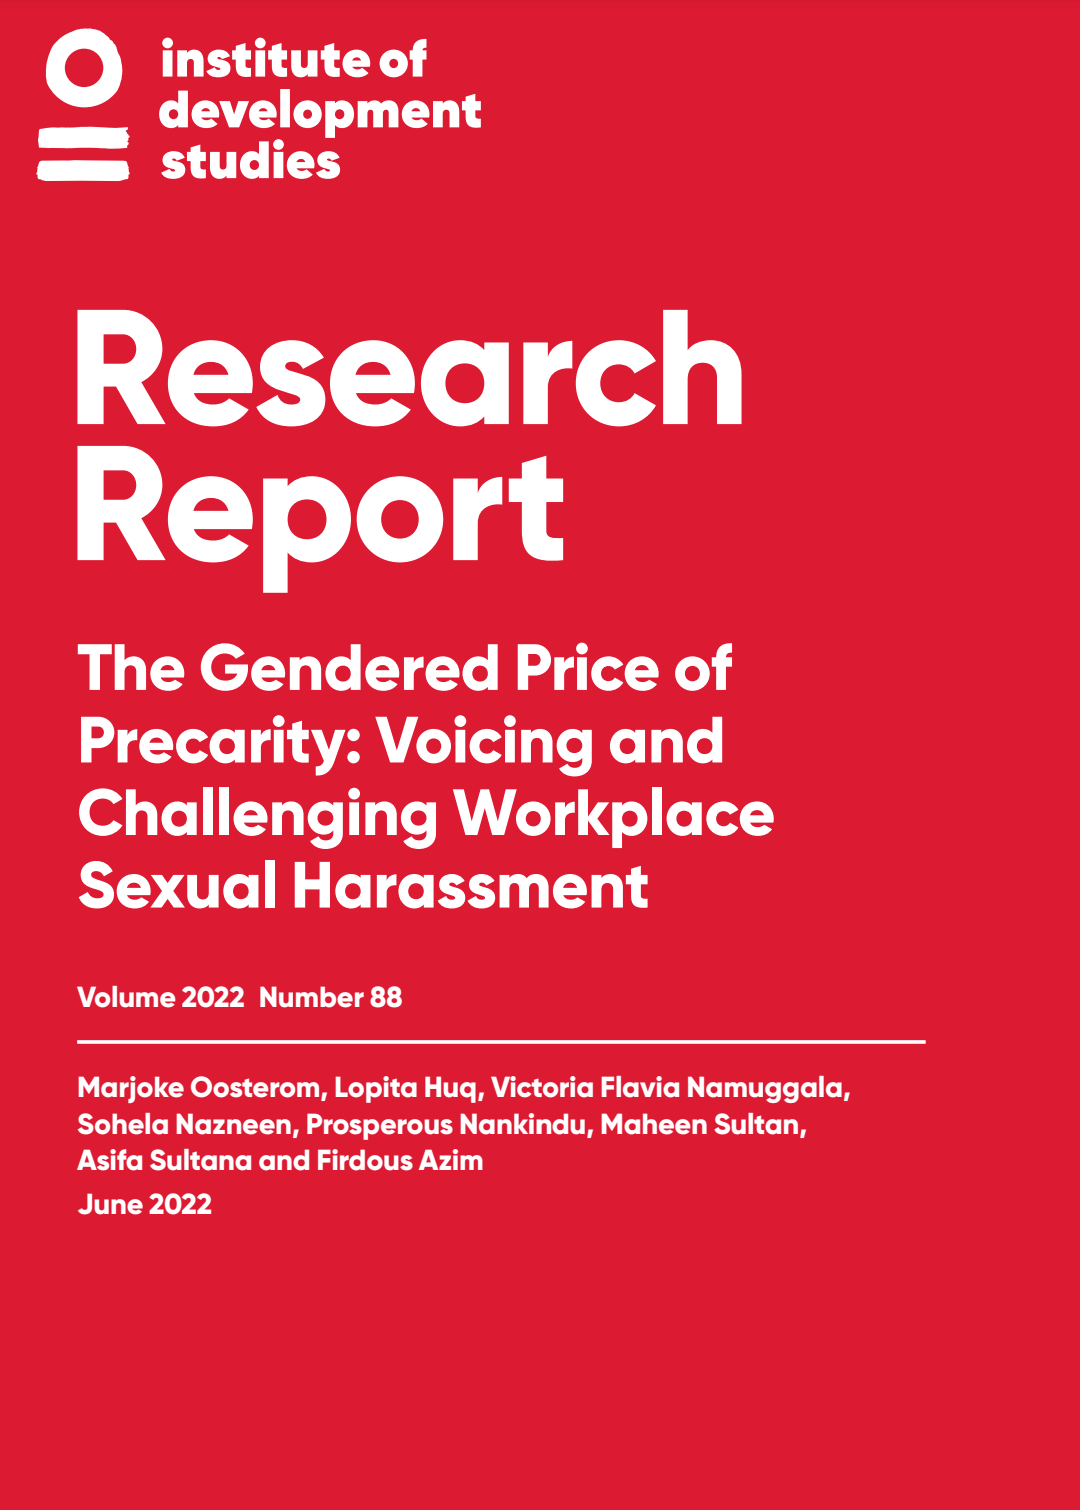 The Gendered Price of Precarity: Voicing and Challenging Workplace Sexual Harassment